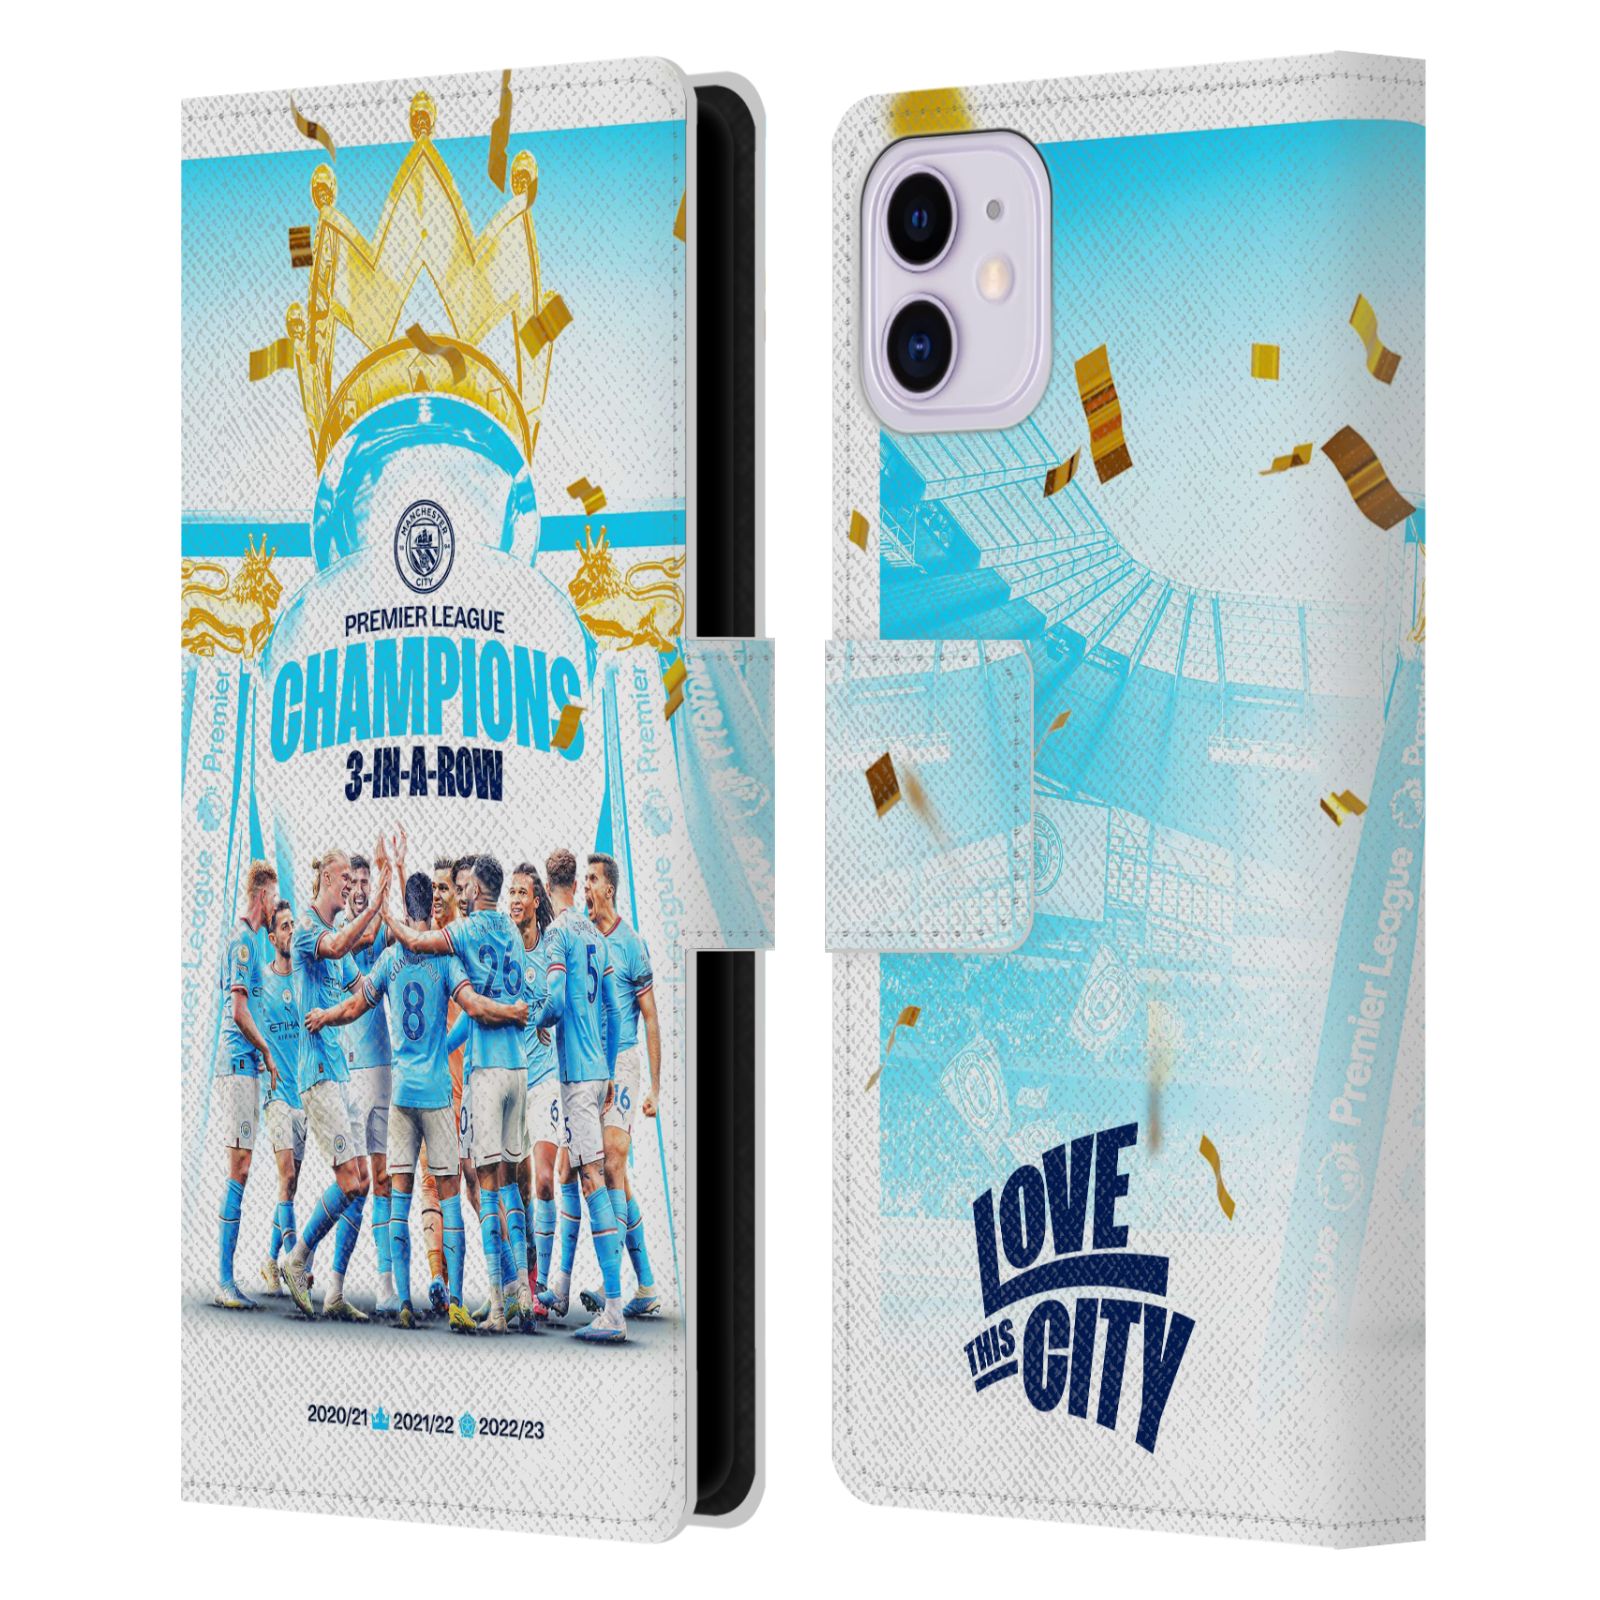 Pouzdro na mobil Apple Iphone 11 - HEAD CASE - Manchester City - Champions 2